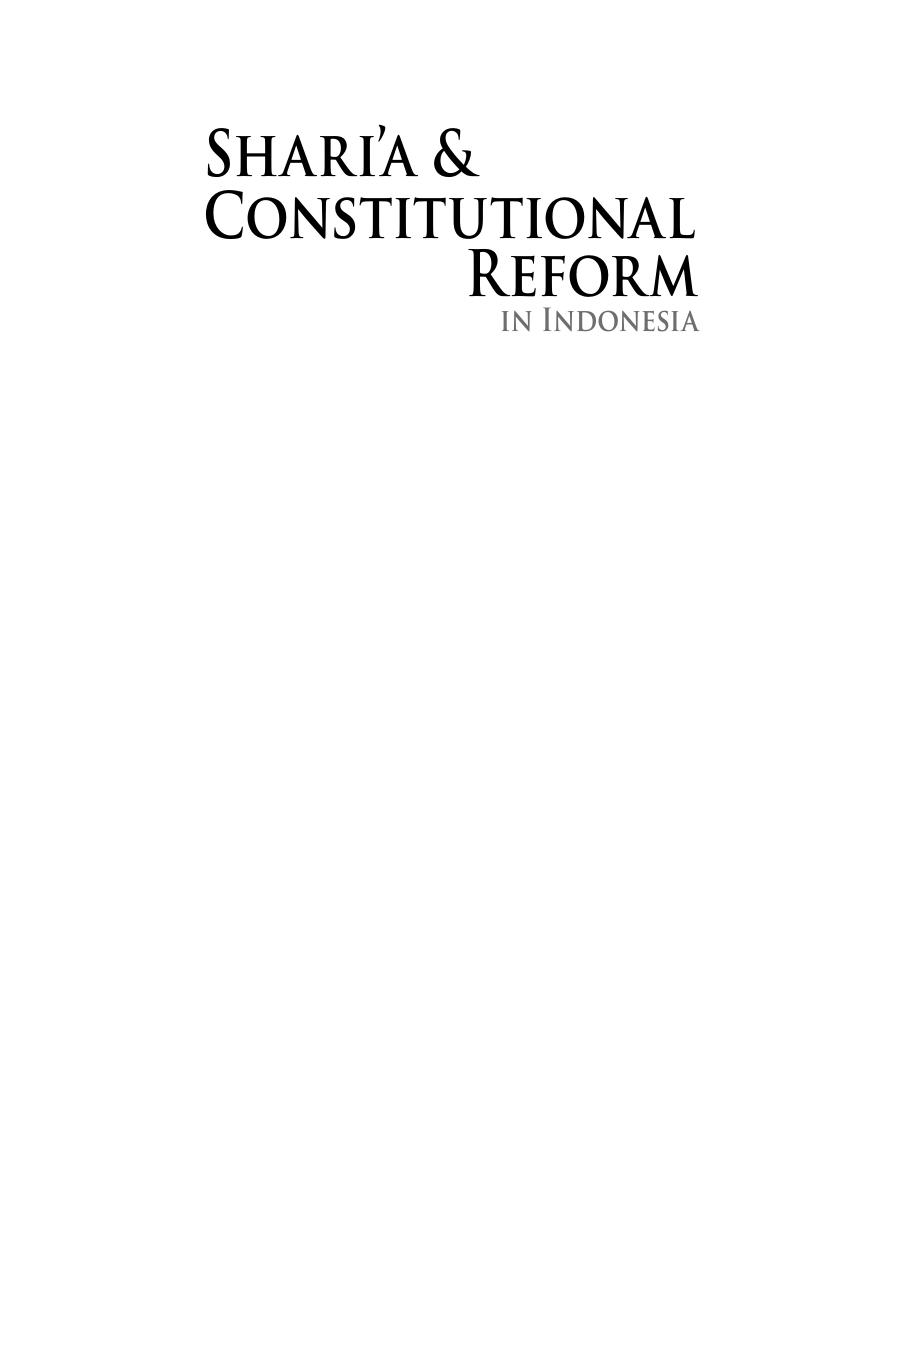 Shari'a and Constitutional Reform in Indonesia by Nadirsyah Hosen